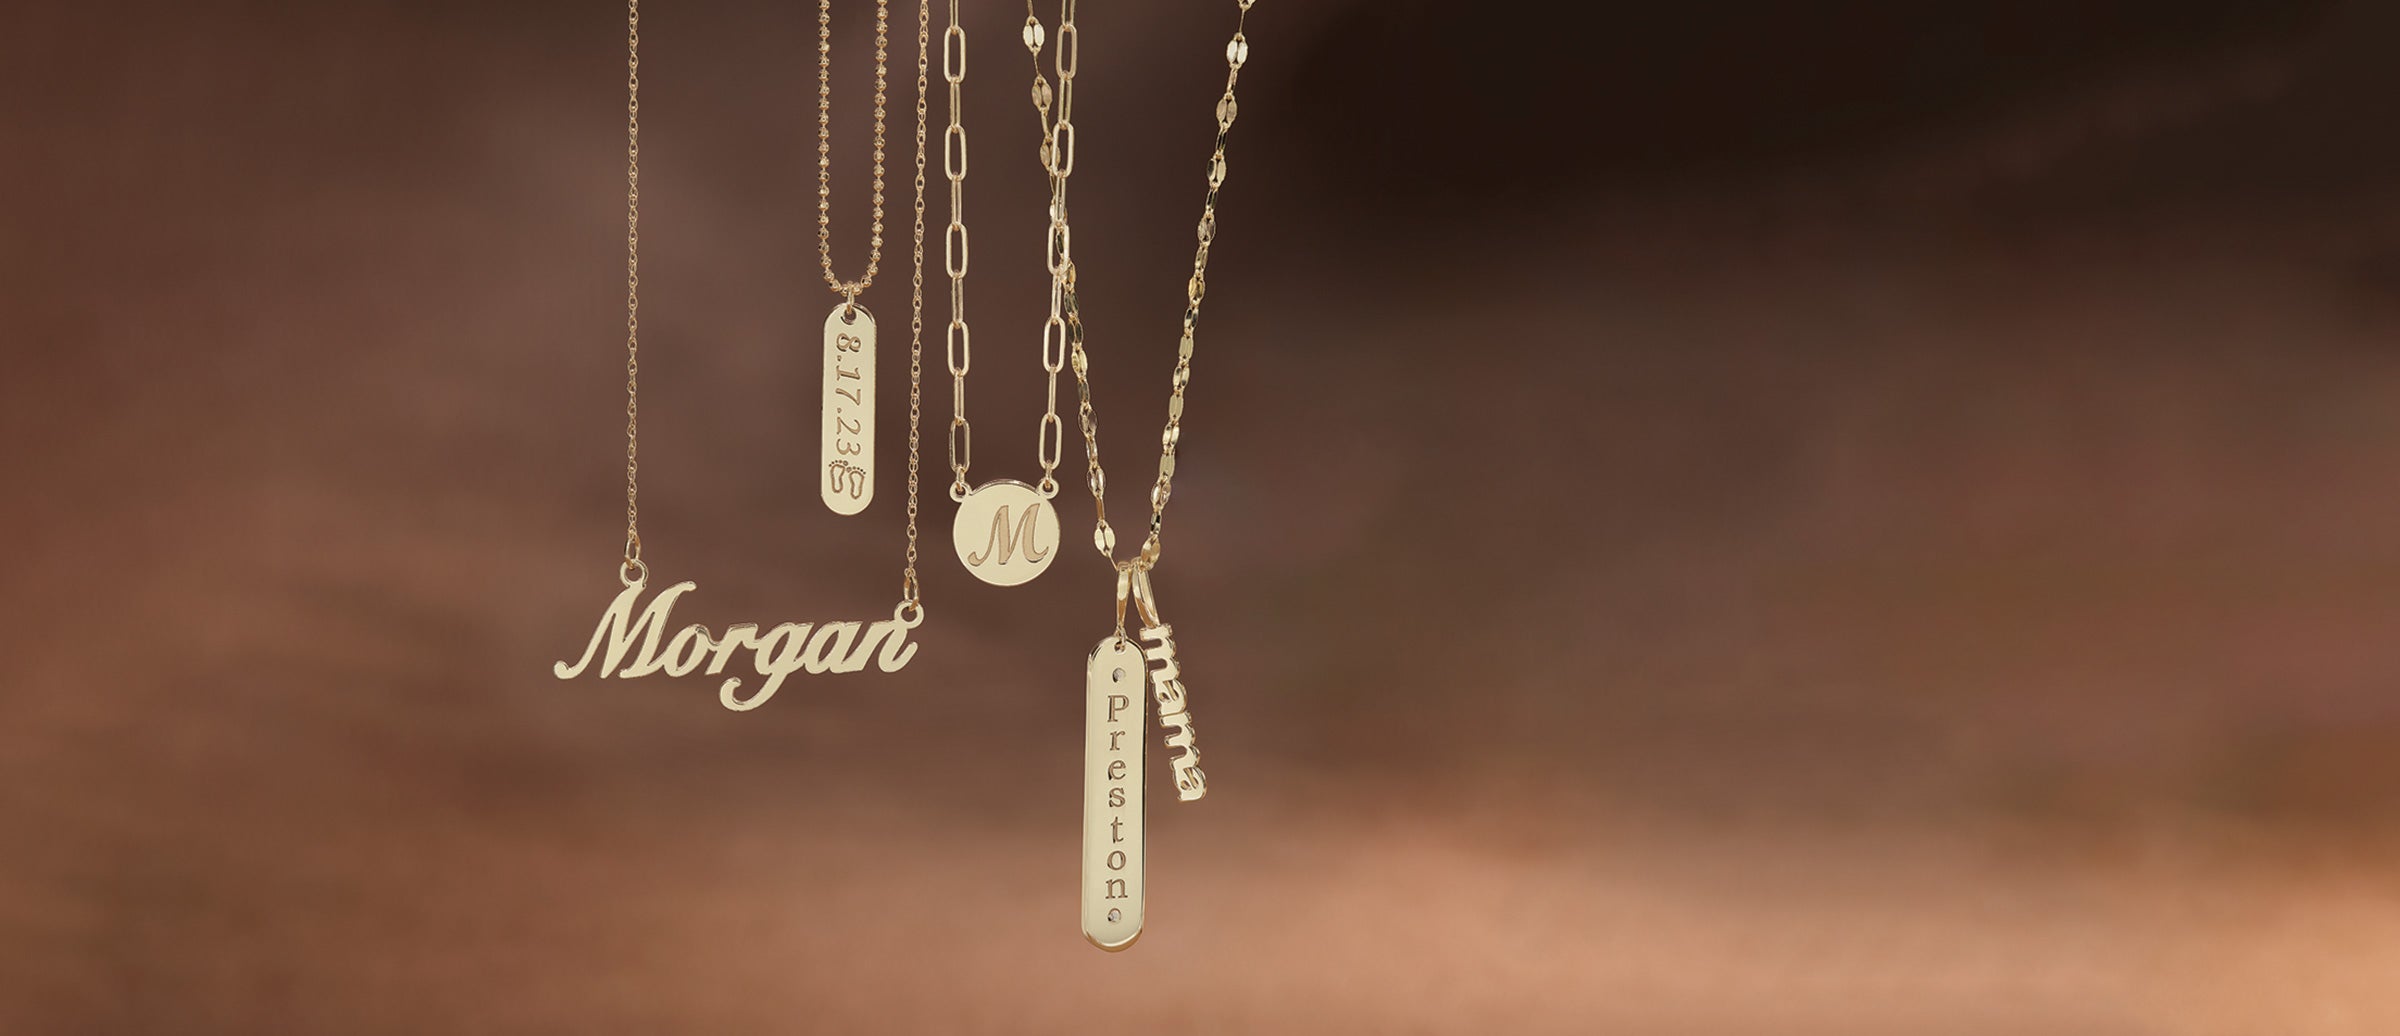 Personalized jewelry to commemorate important people and meaningful moments